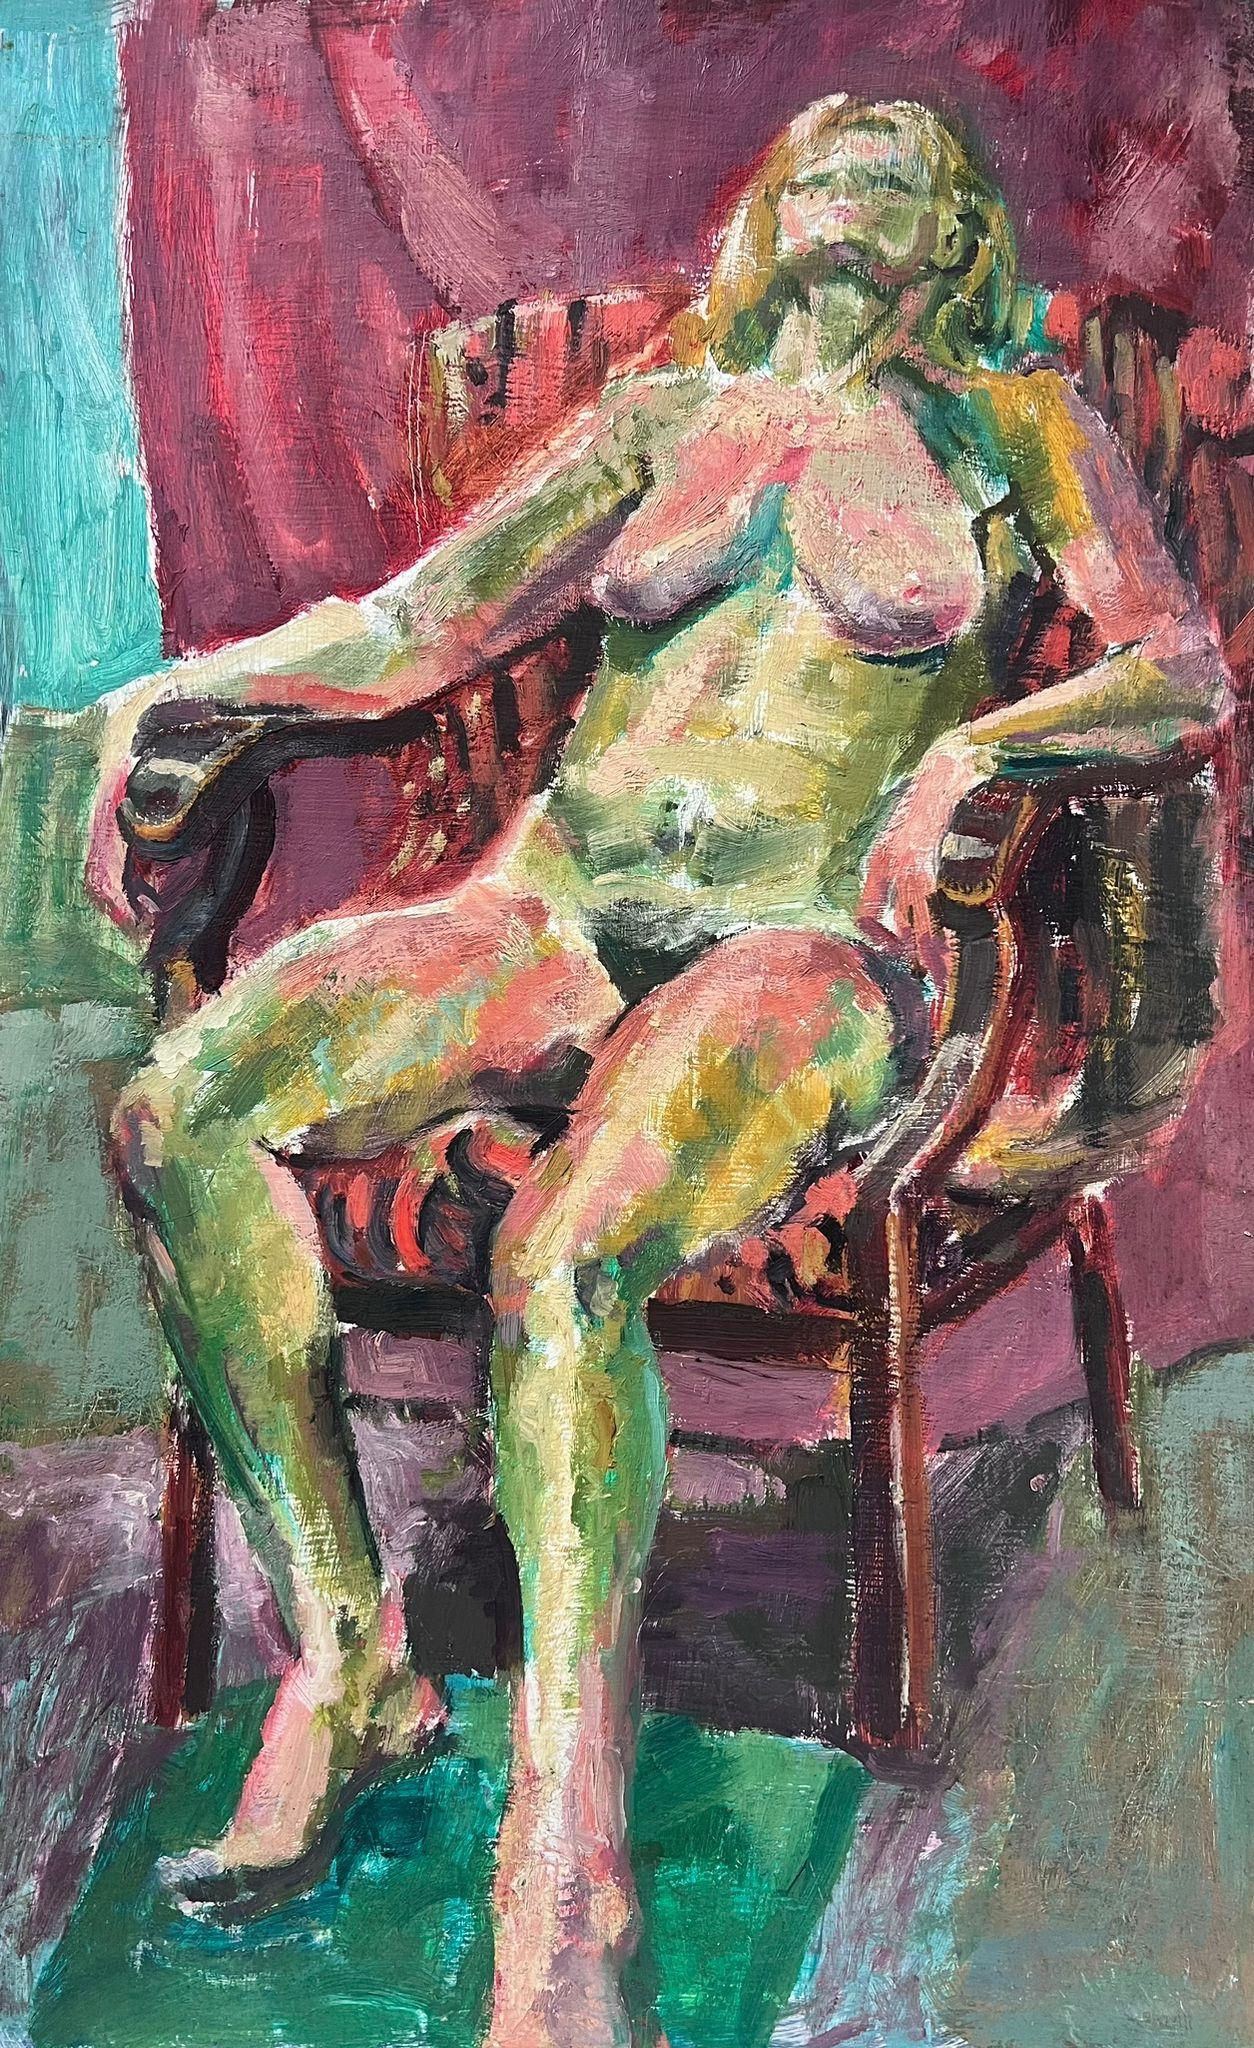 The Artists Nude Model
by Helen Greenfield (British 20th century) 
oil painting on board, unframed
board: 26 x 16.5 inches
condition: overall very good
provenance: all the paintings we have by this artist have come from their studio sale in